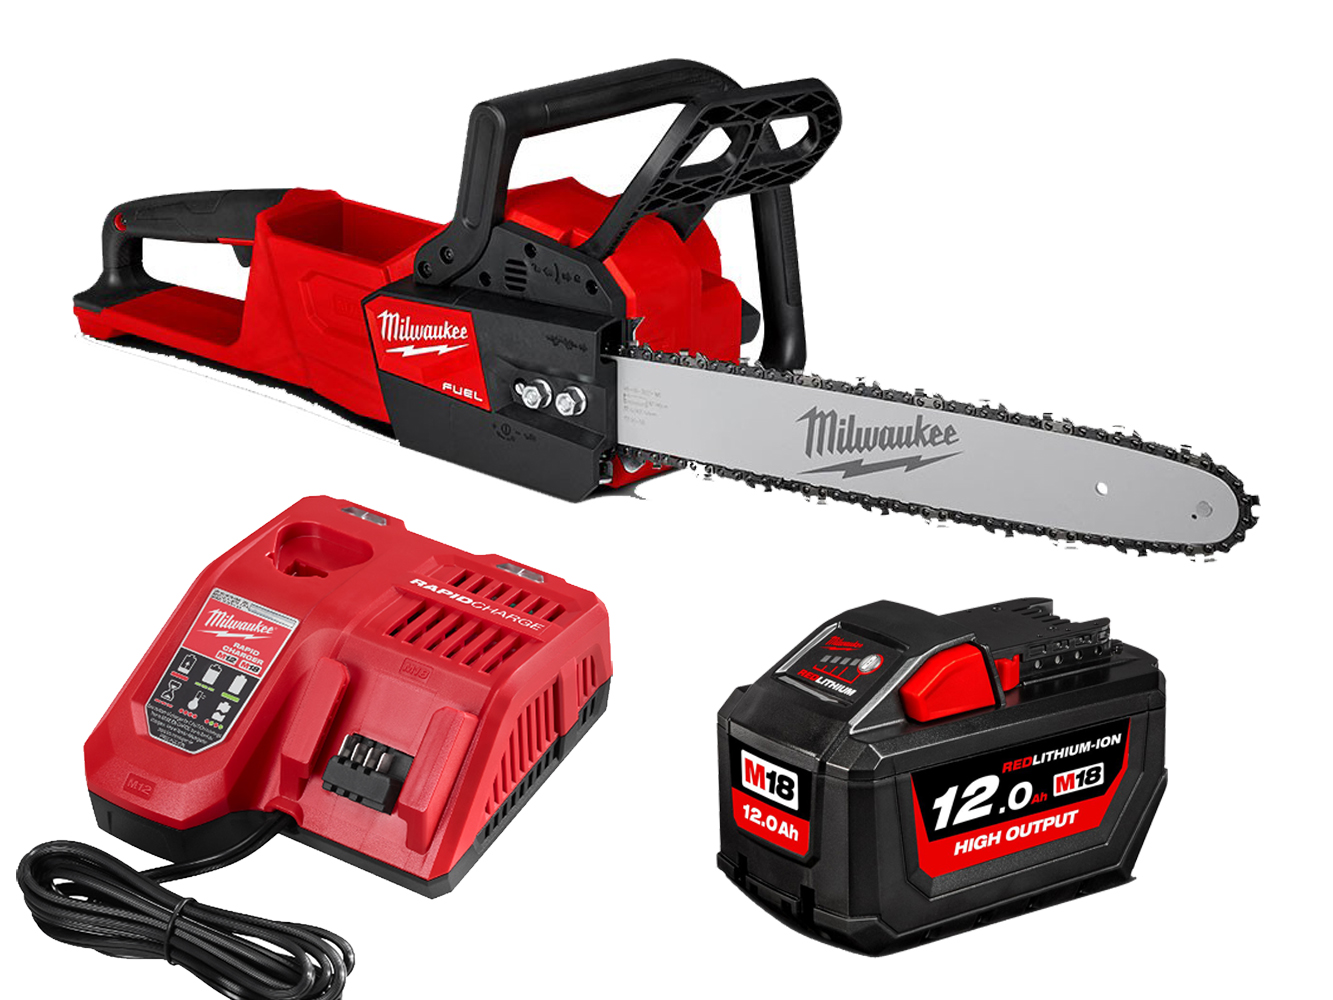 Milwaukee 18V Fuel Brushless 16in / 400mm Chainsaw - M18FCHS - 12.0ah Pack